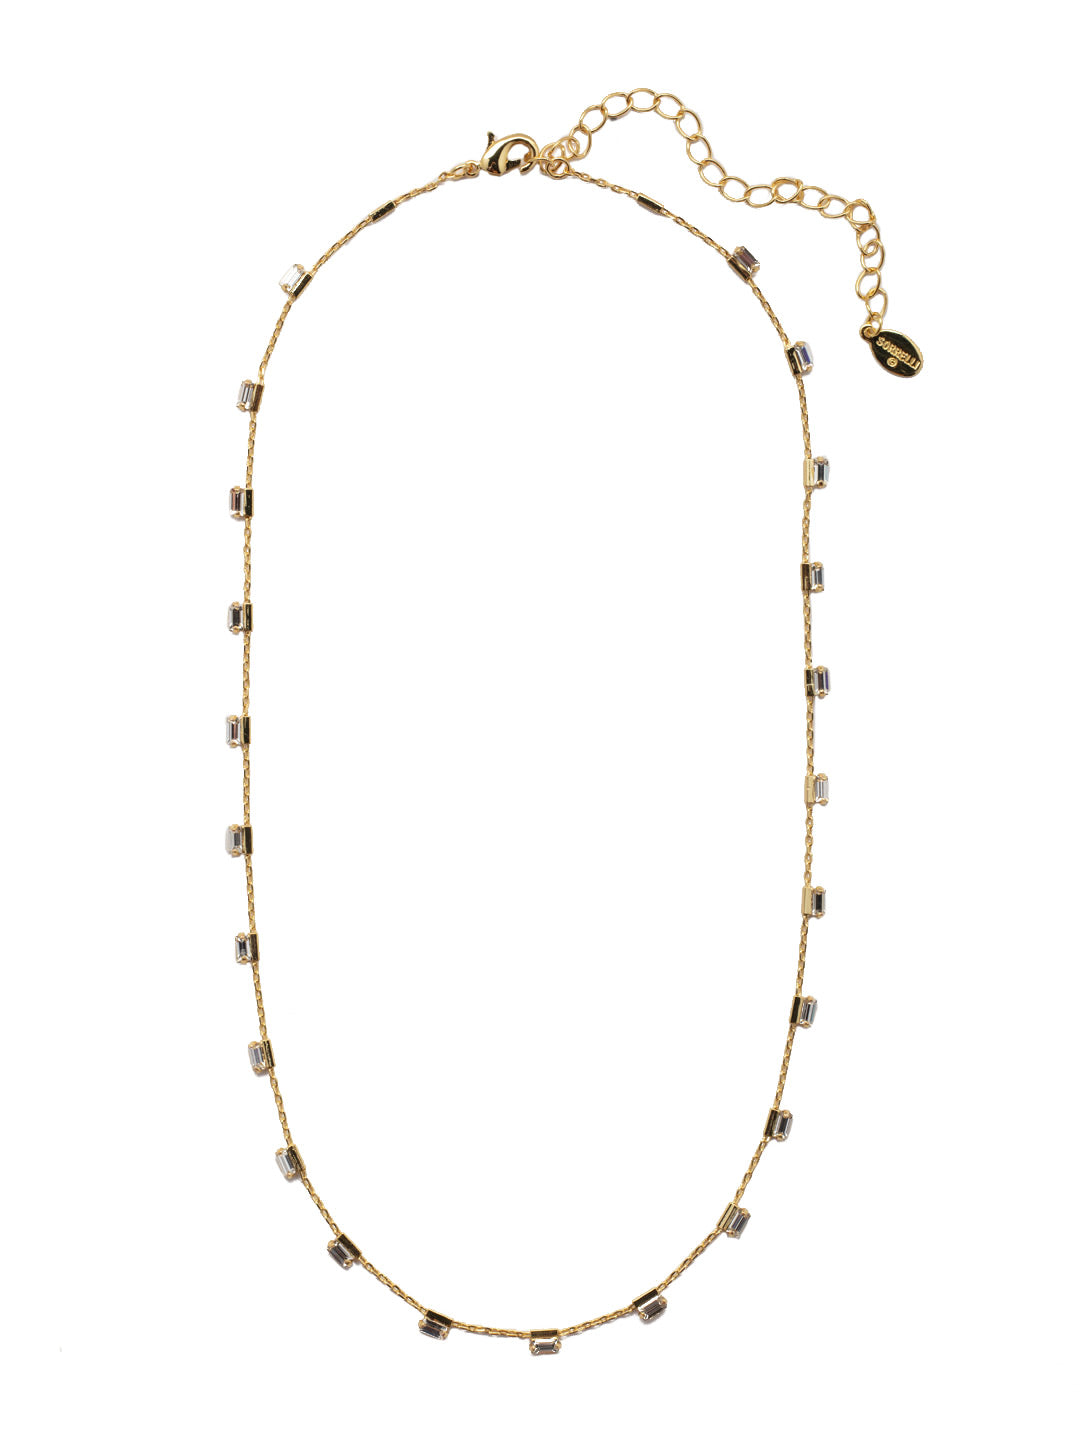 Cleo Studded Tennis Necklace - 4NEZ2BGCRY - <p>Emerald cut crystals line the entire chain of the Cleo Studded Tennis Necklace to create a beautiful piece that can be worn with anything. Secured with a lobster claw clasp, the necklace can be adjusted to a longer length. From Sorrelli's Crystal collection in our Bright Gold-tone finish.</p>